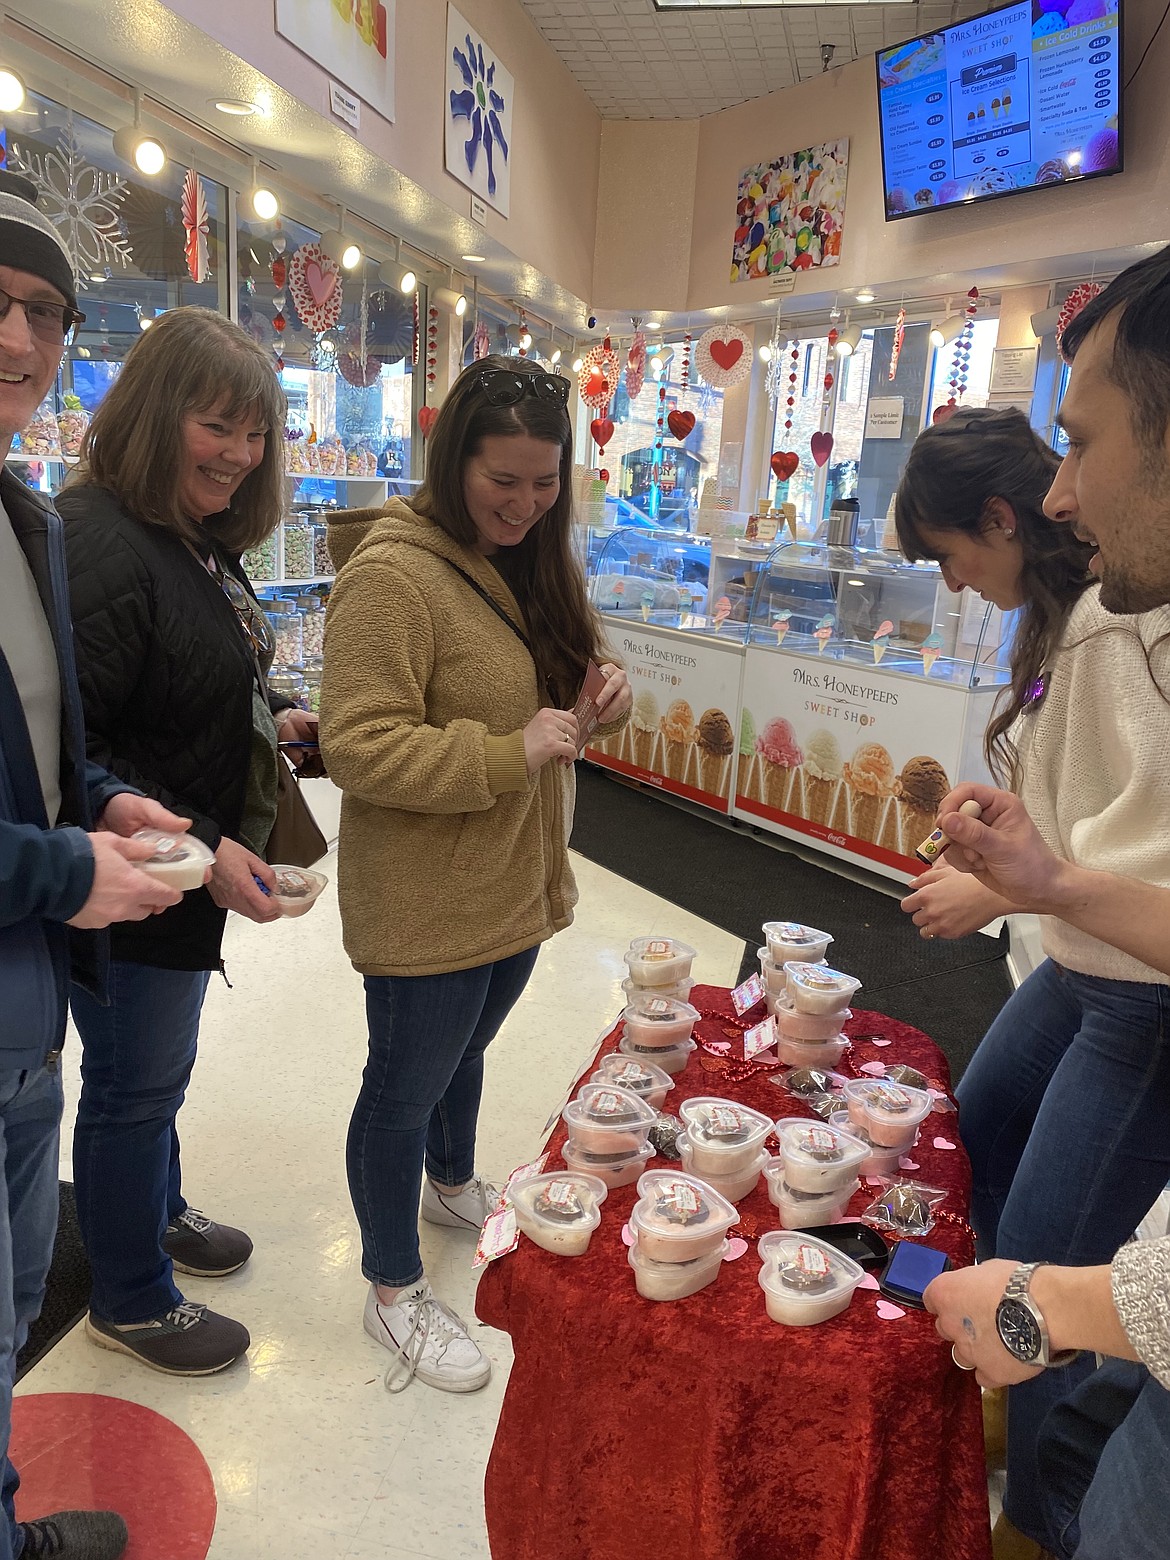 From left: Paul, Tammy and Rachel Heggenberger visit Mrs. Honeypeeps Sweet Shop, while owners of the shop Hediye and Devin Sommer describe the sweet treat offered for the annual Chocolate Affair held Friday night.